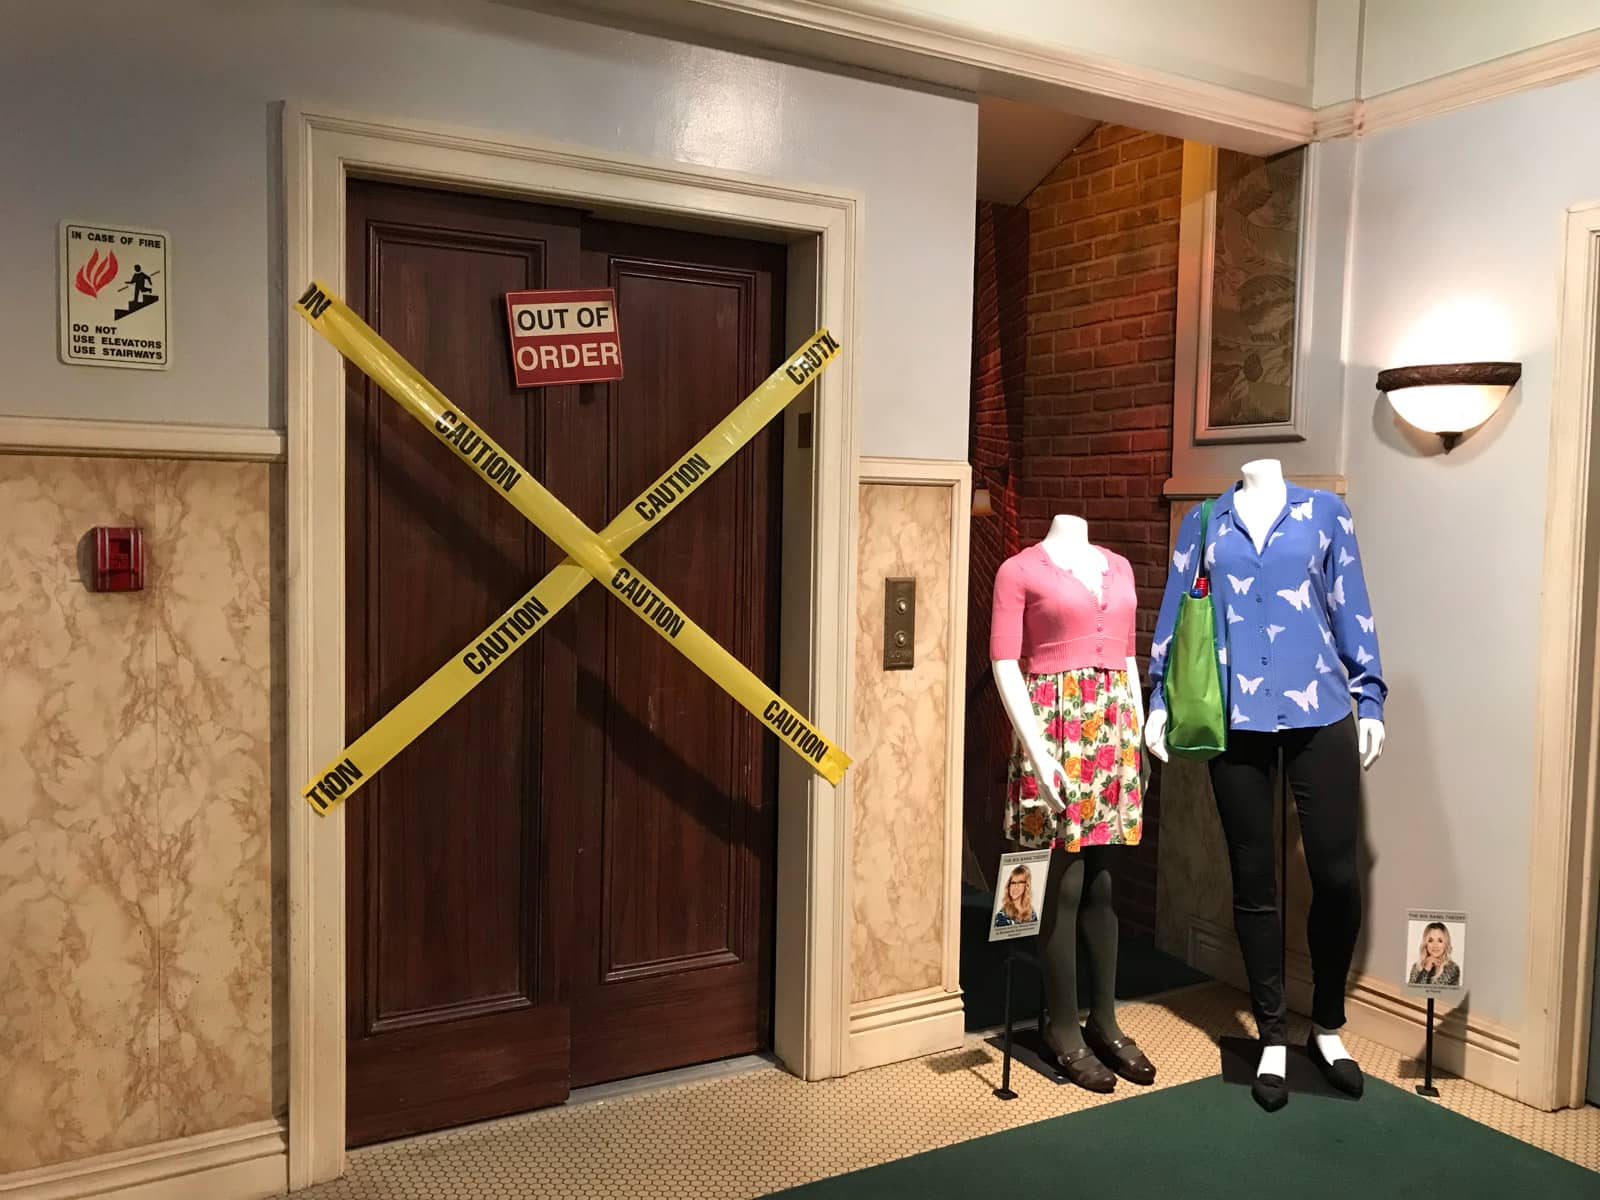 A television stage set that looks like the elevator in an apartment block, but that is not functioning. Yellow tape blocks the doors of the elevator. Two mannequins stand next to the elevator door, displaying charactersâ€™ costumes.